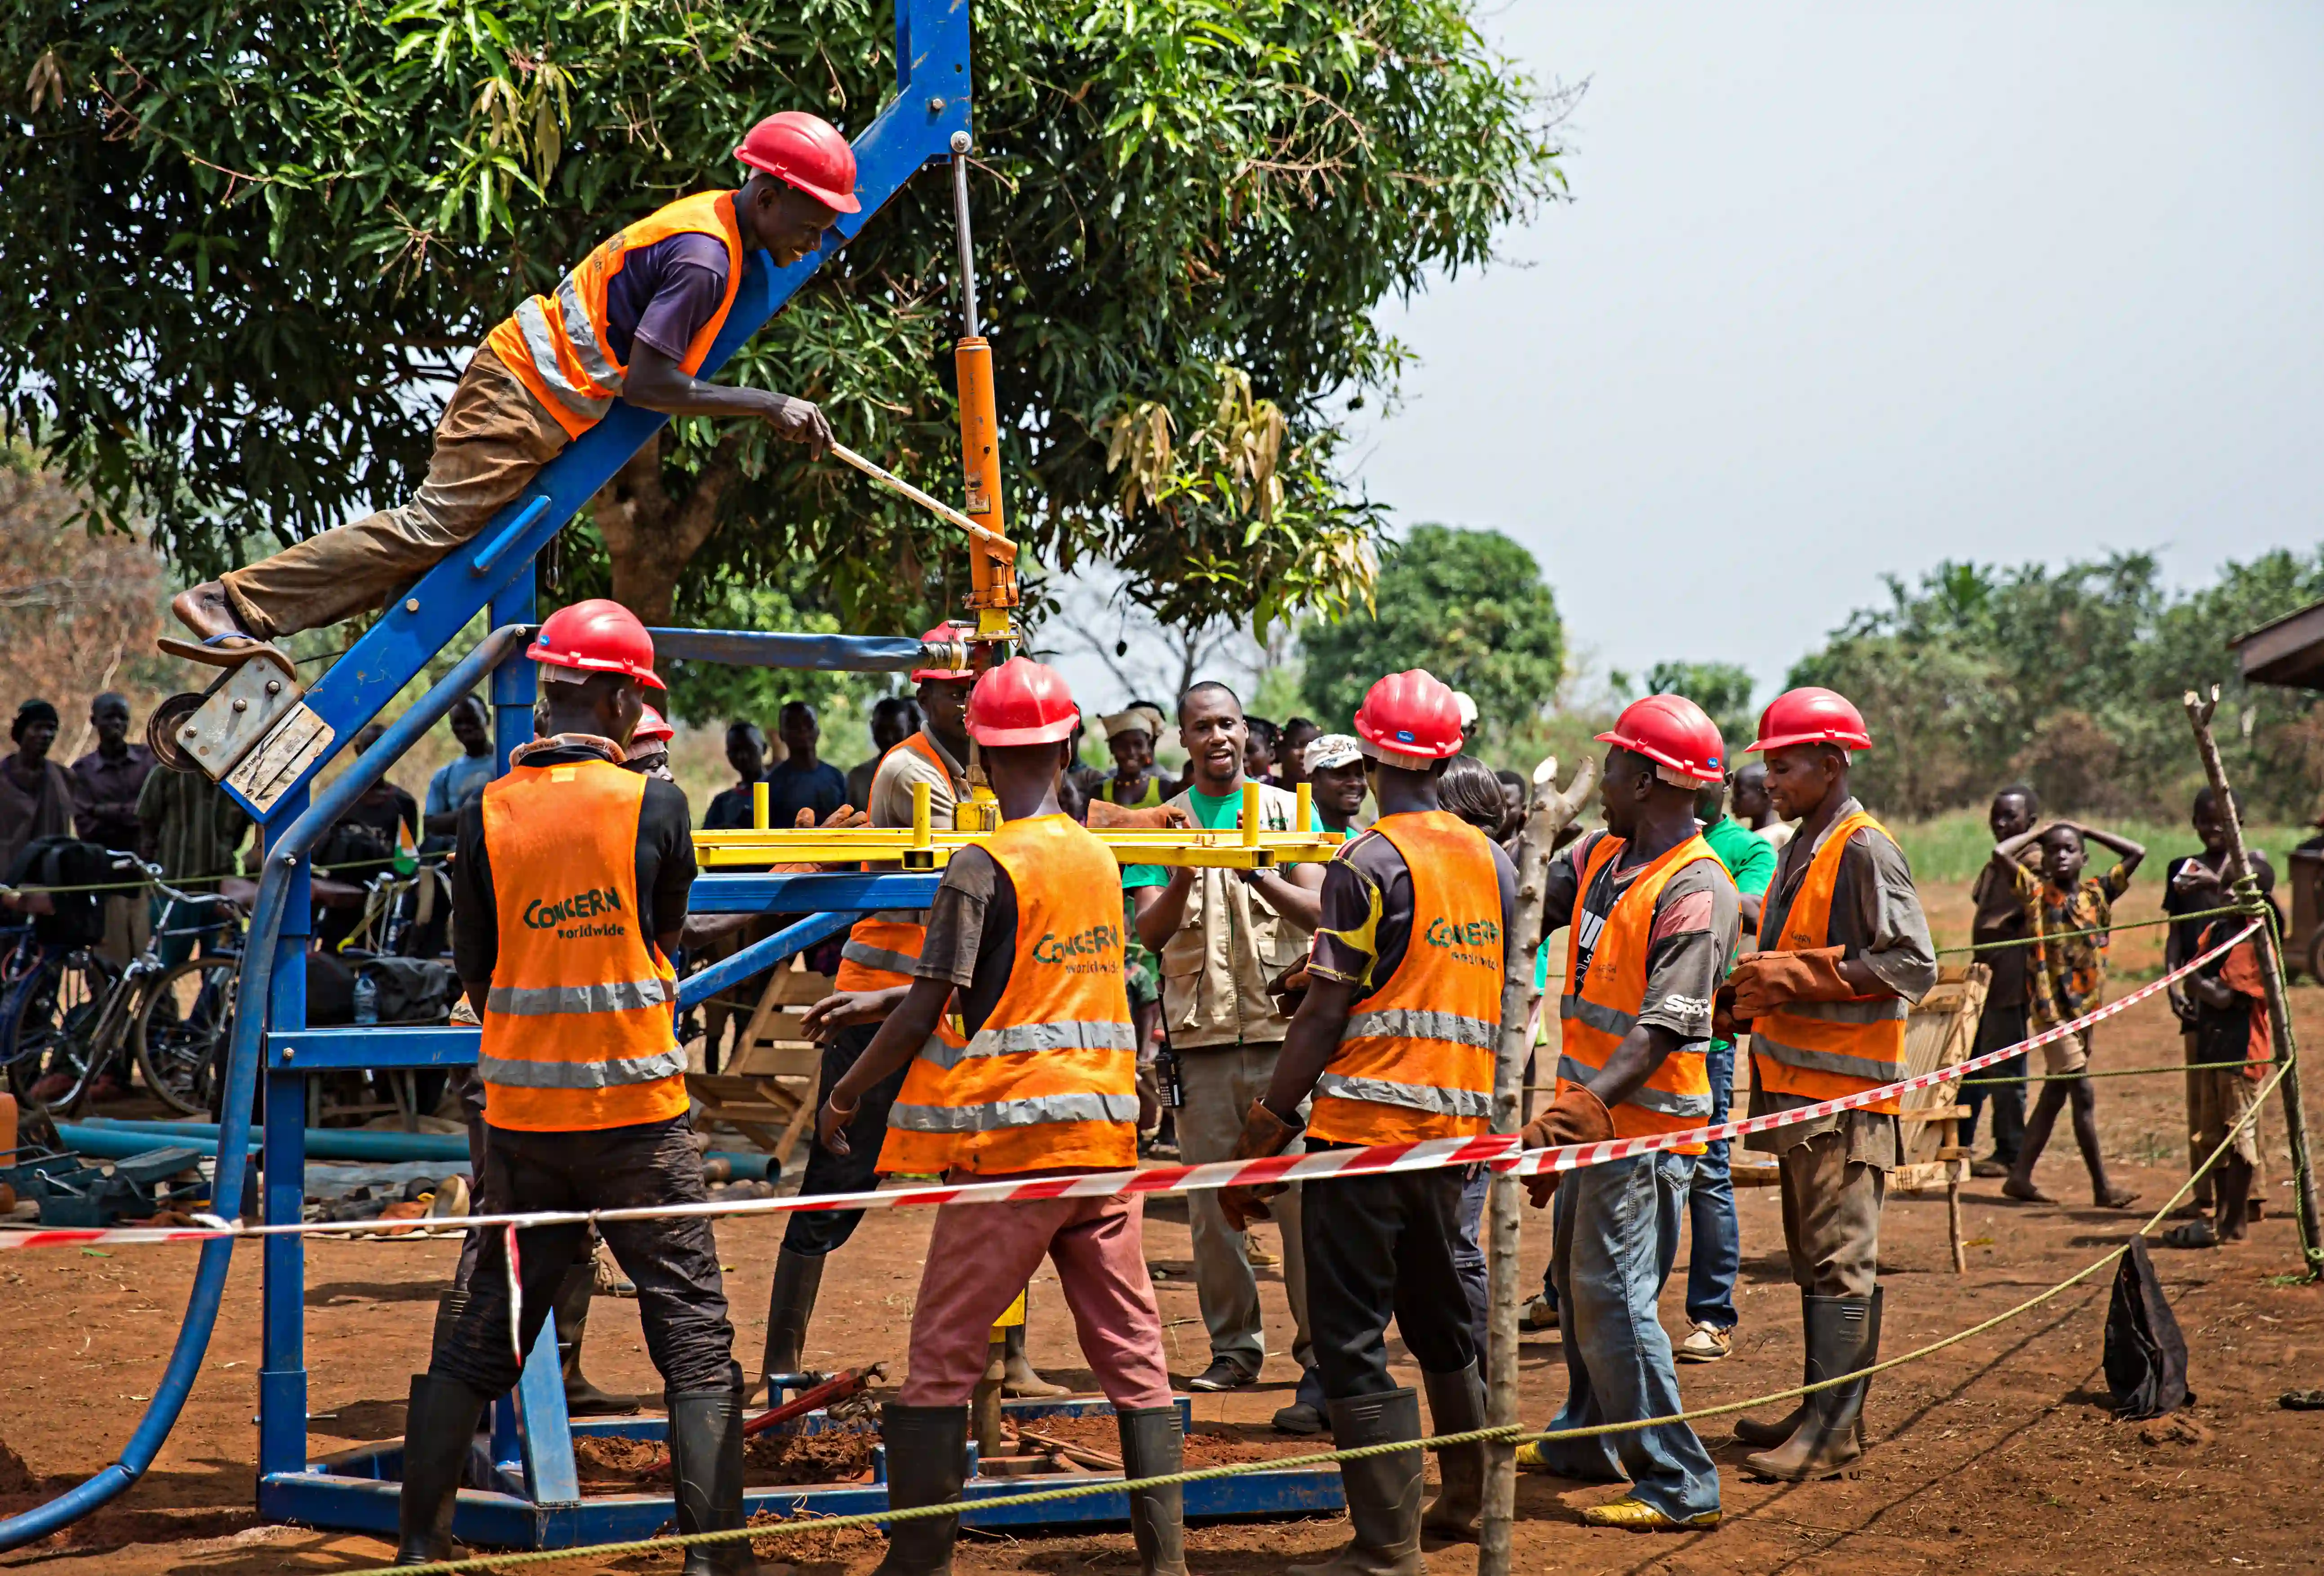 Concern teams restore a borehole that was destroyed during the conflict in CAR, cutting off water supplies to an entire community.